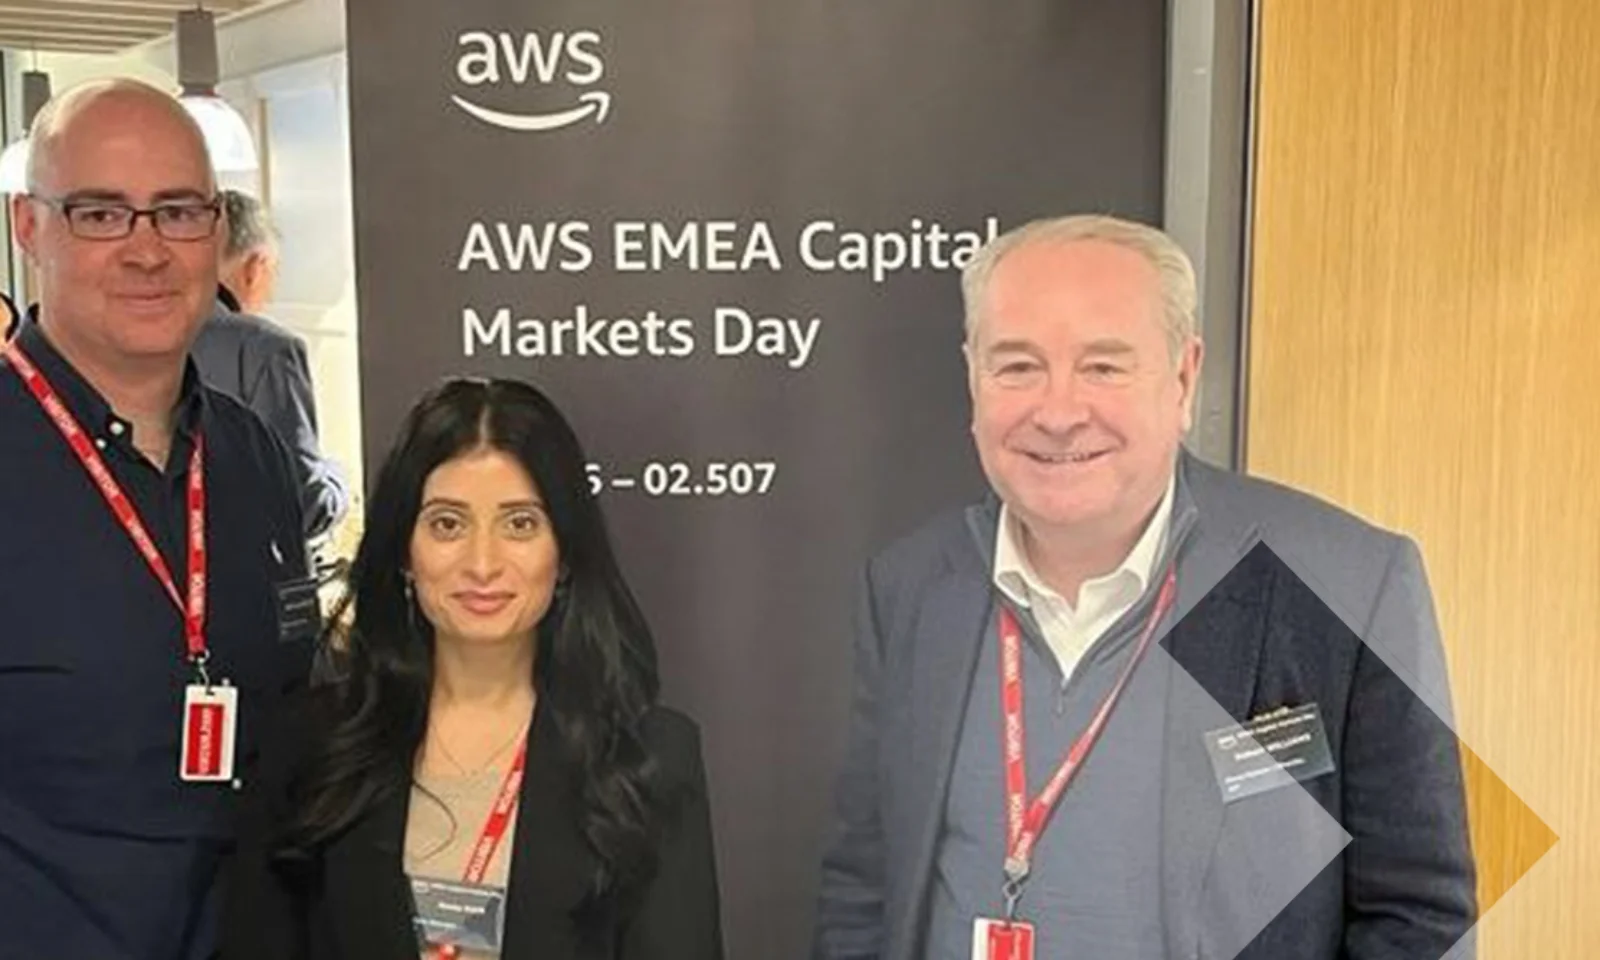 Key insights from Team GFT at AWS EMEA Capital Markets Day in London! Explore our blog for expert perspectives and highlights.